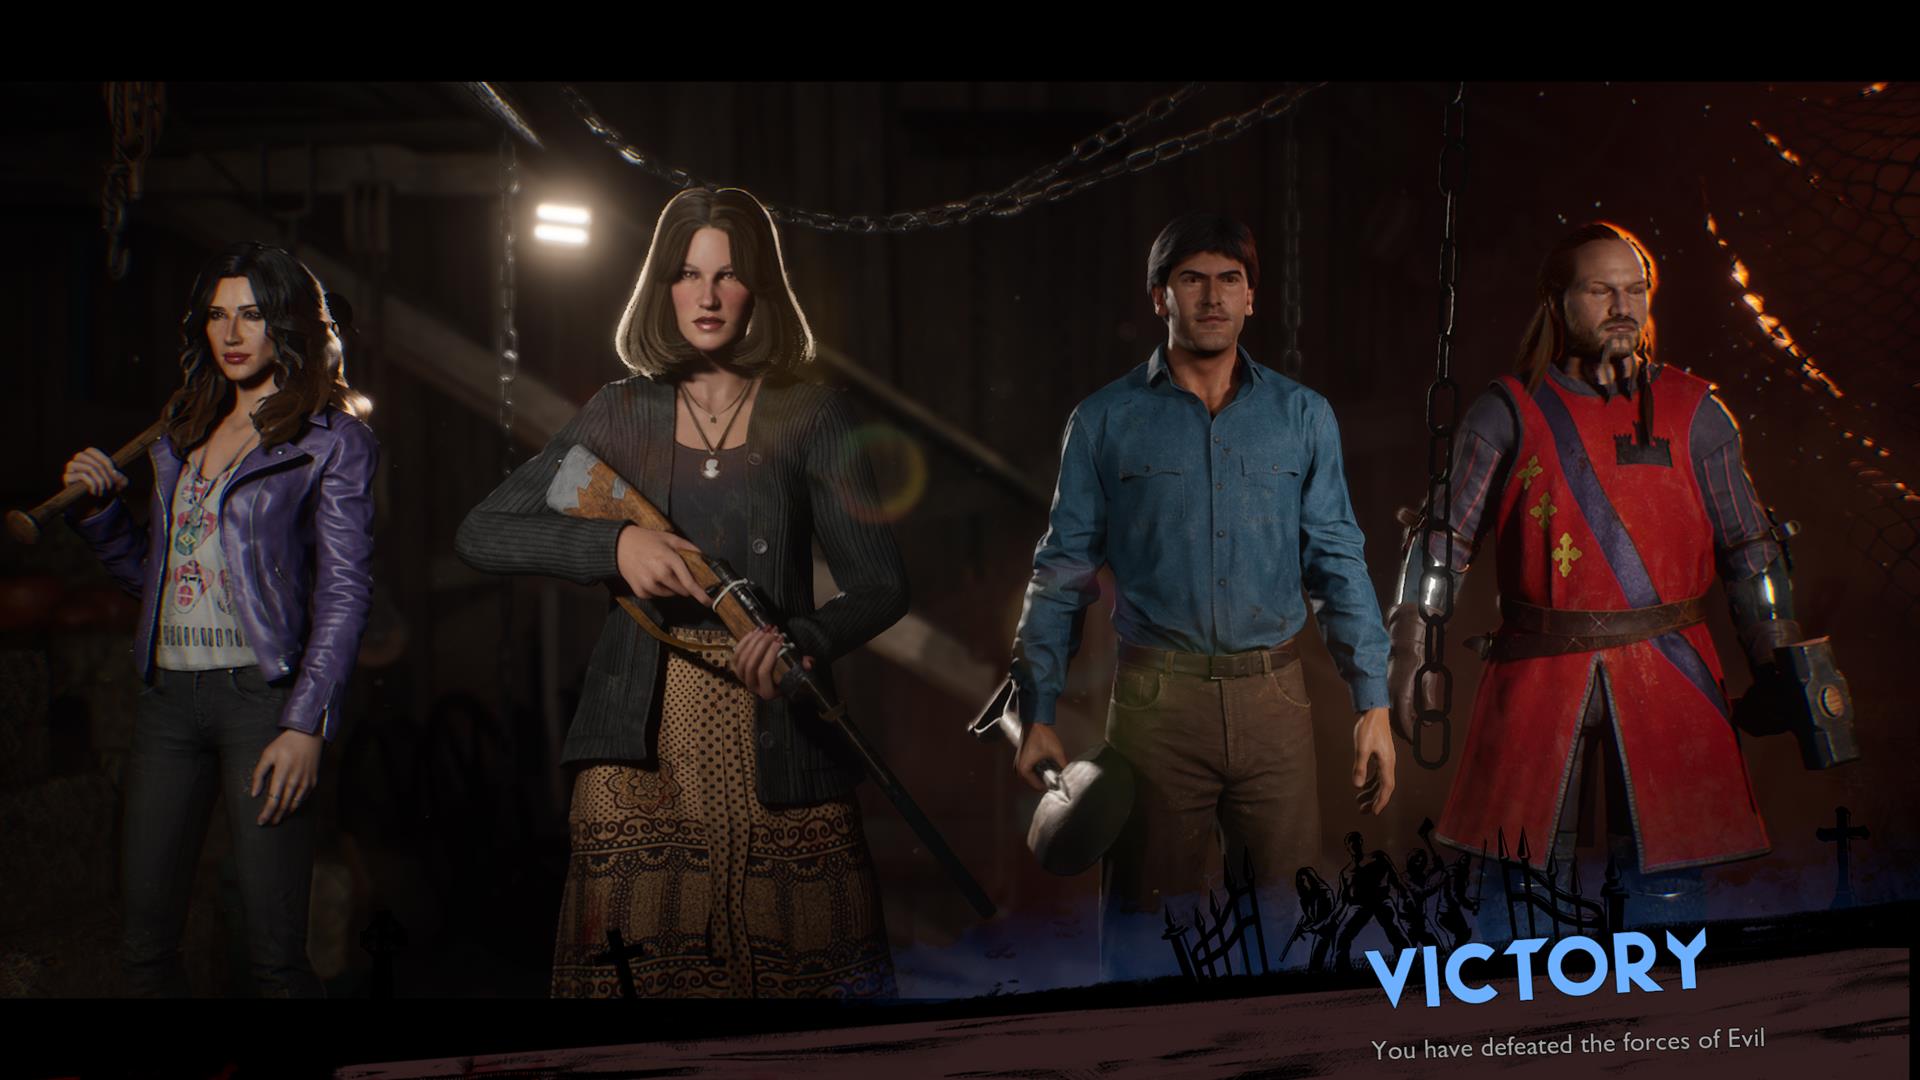 EvilDeadTheGame on X: Look out for info on the next map to be